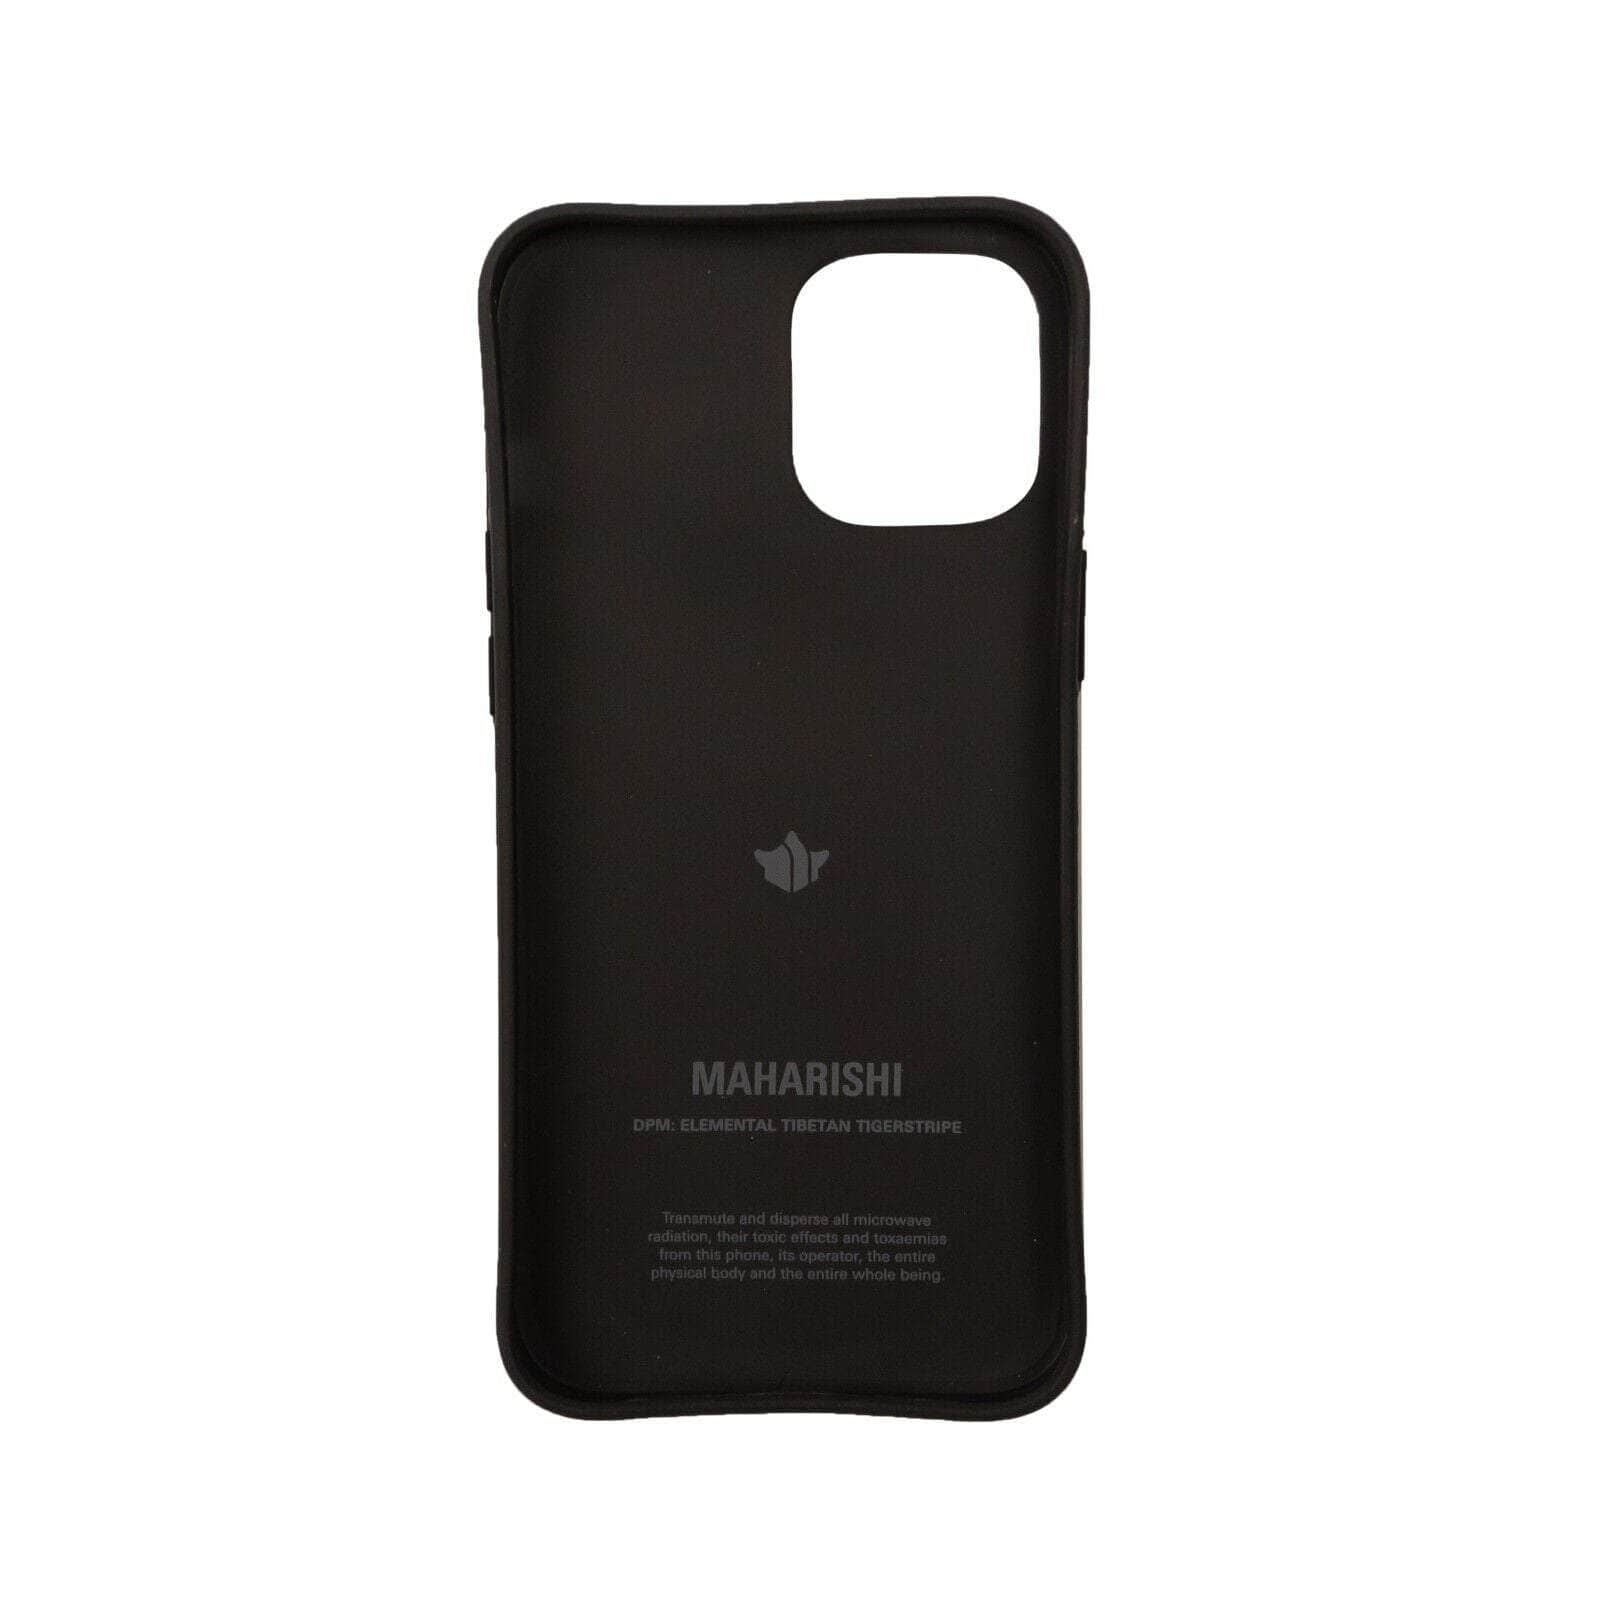 Maharishi couponcollection, gender-mens, gender-womens, maharishi, main-accessories, mens-shoes, size-os, under-250, unisex-phone-cases OS Black iPhone 12 Pro Max Tigers Case 95-MSI-3004/OS 95-MSI-3004/OS